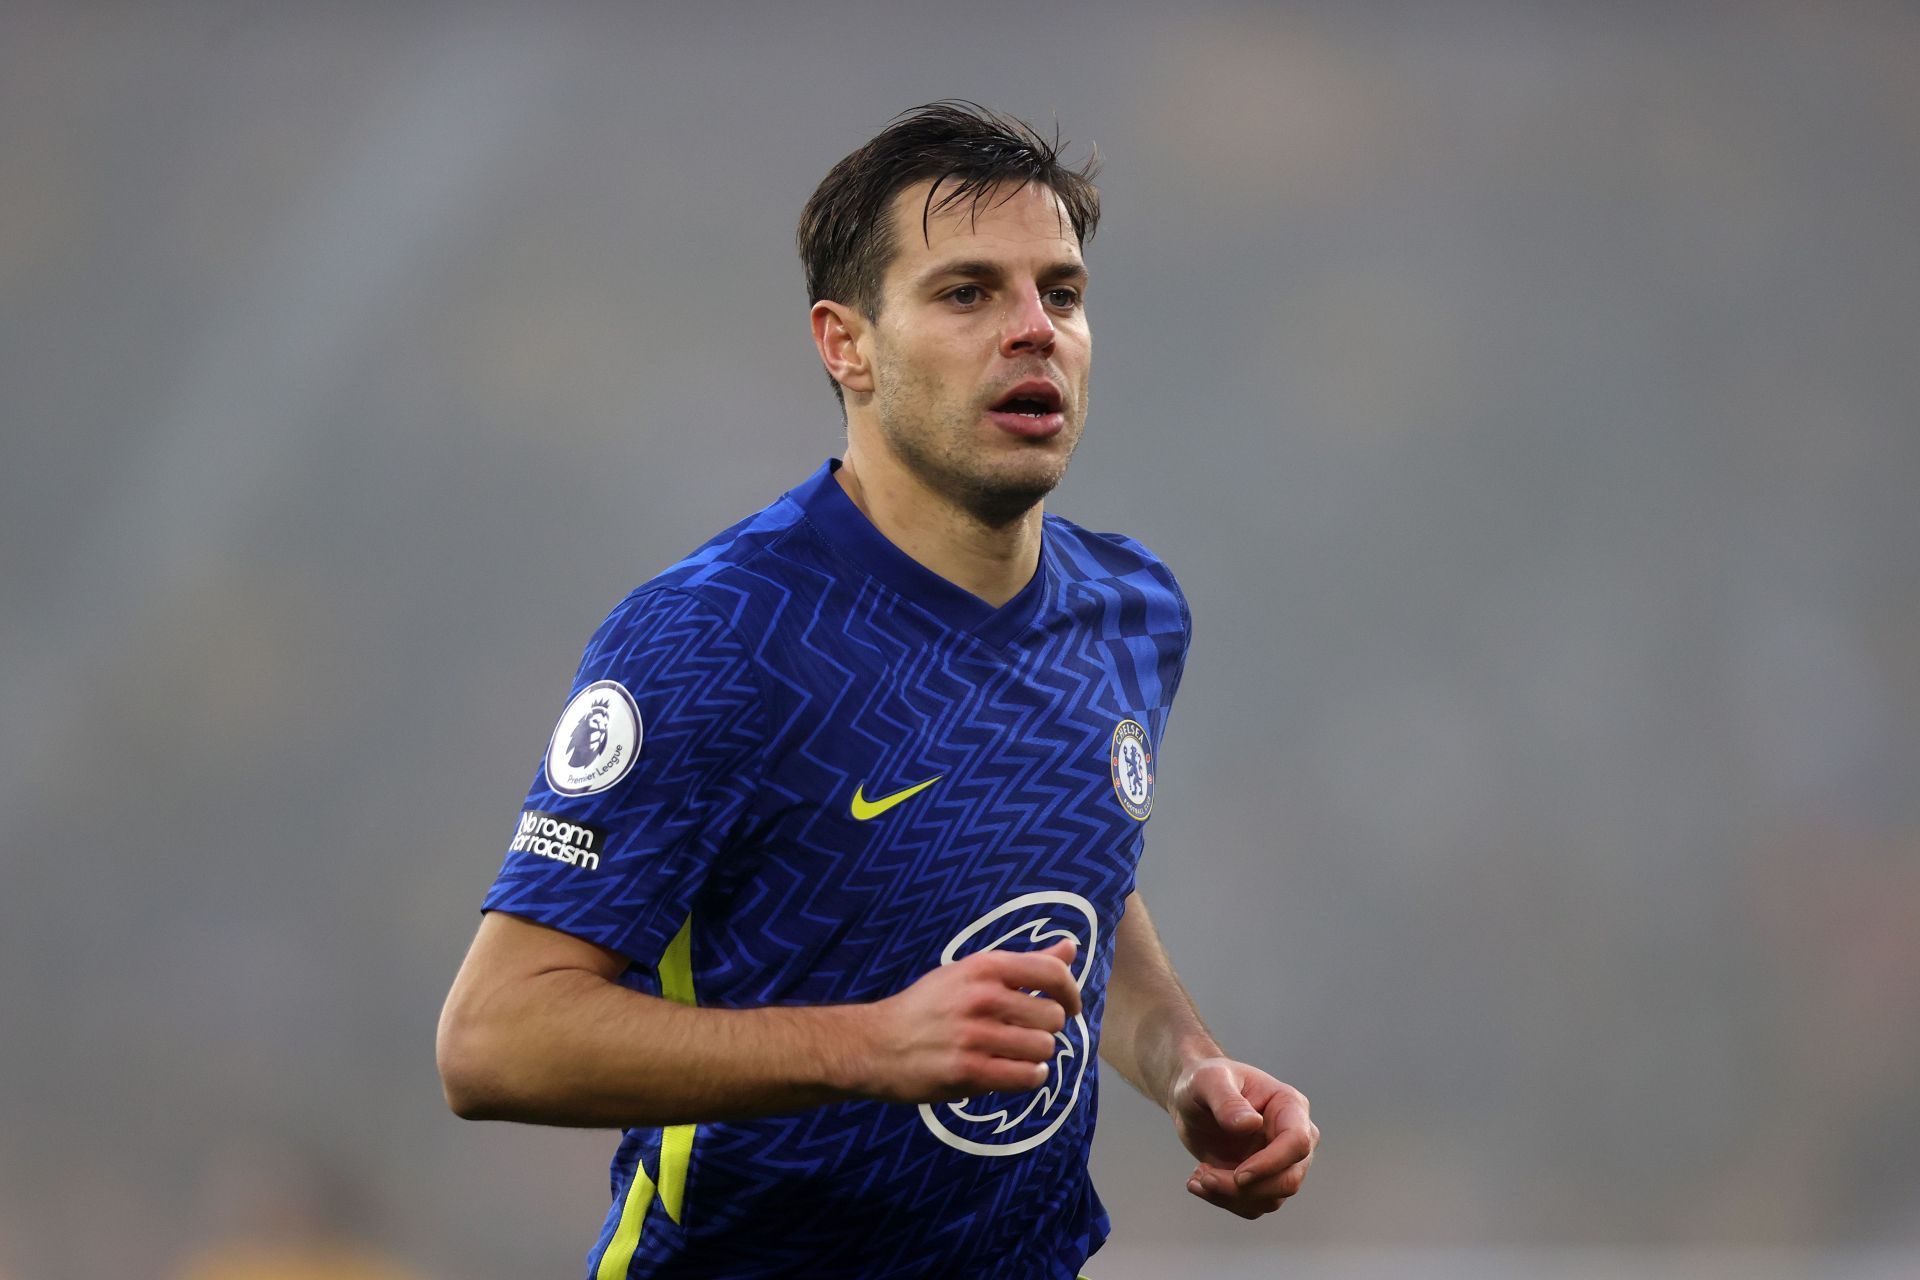 Cesar Azpilicueta is willing to reject Barcelona to stay with Chelsea.